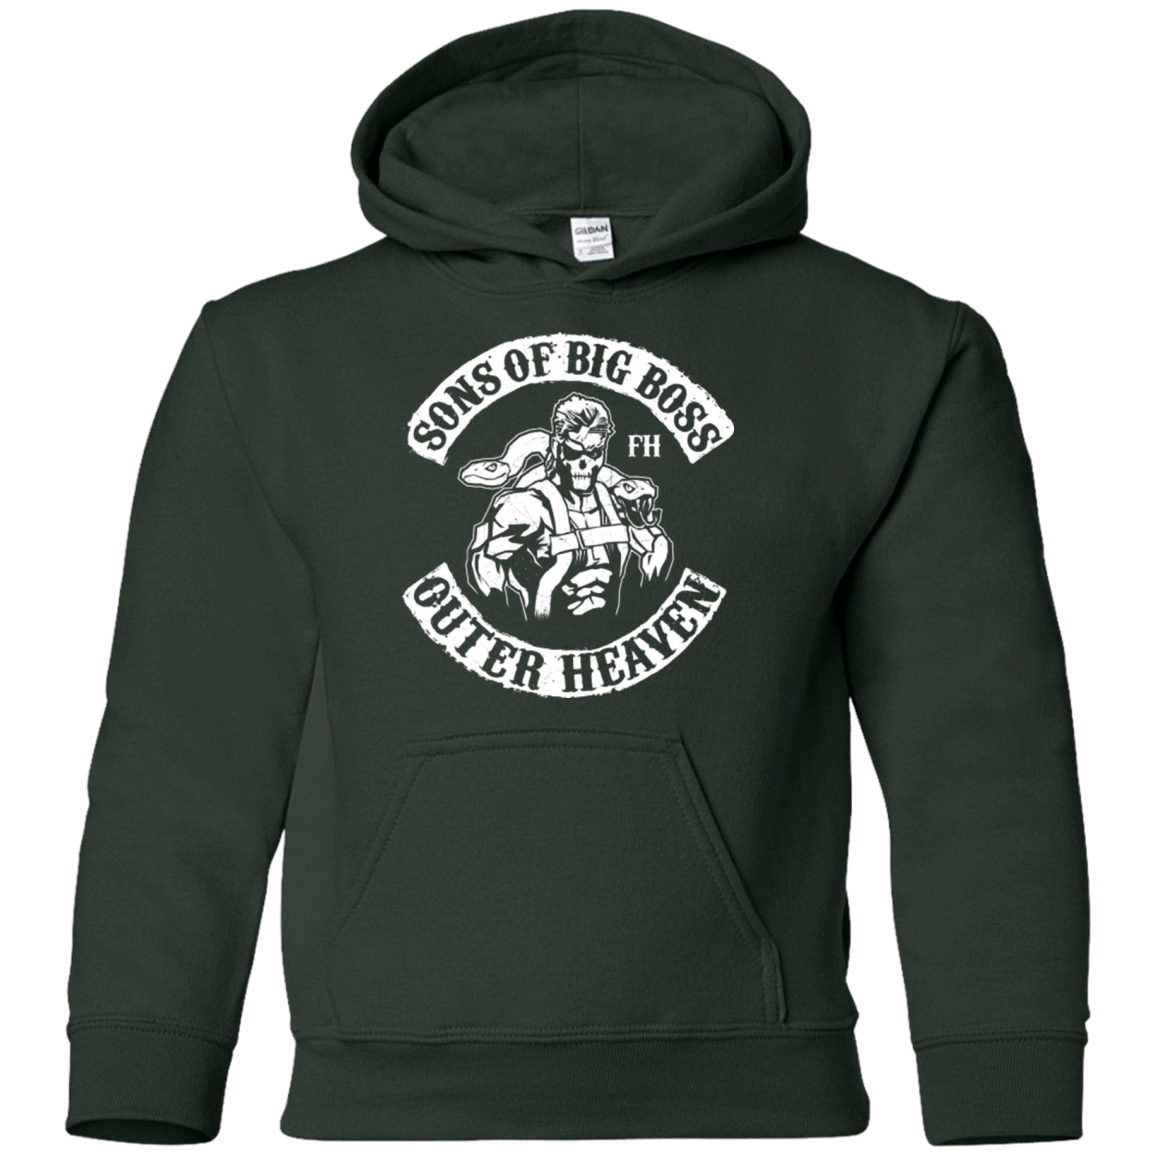 Sweatshirts Forest Green / YS SONS OF BIG BOSS Youth Hoodie